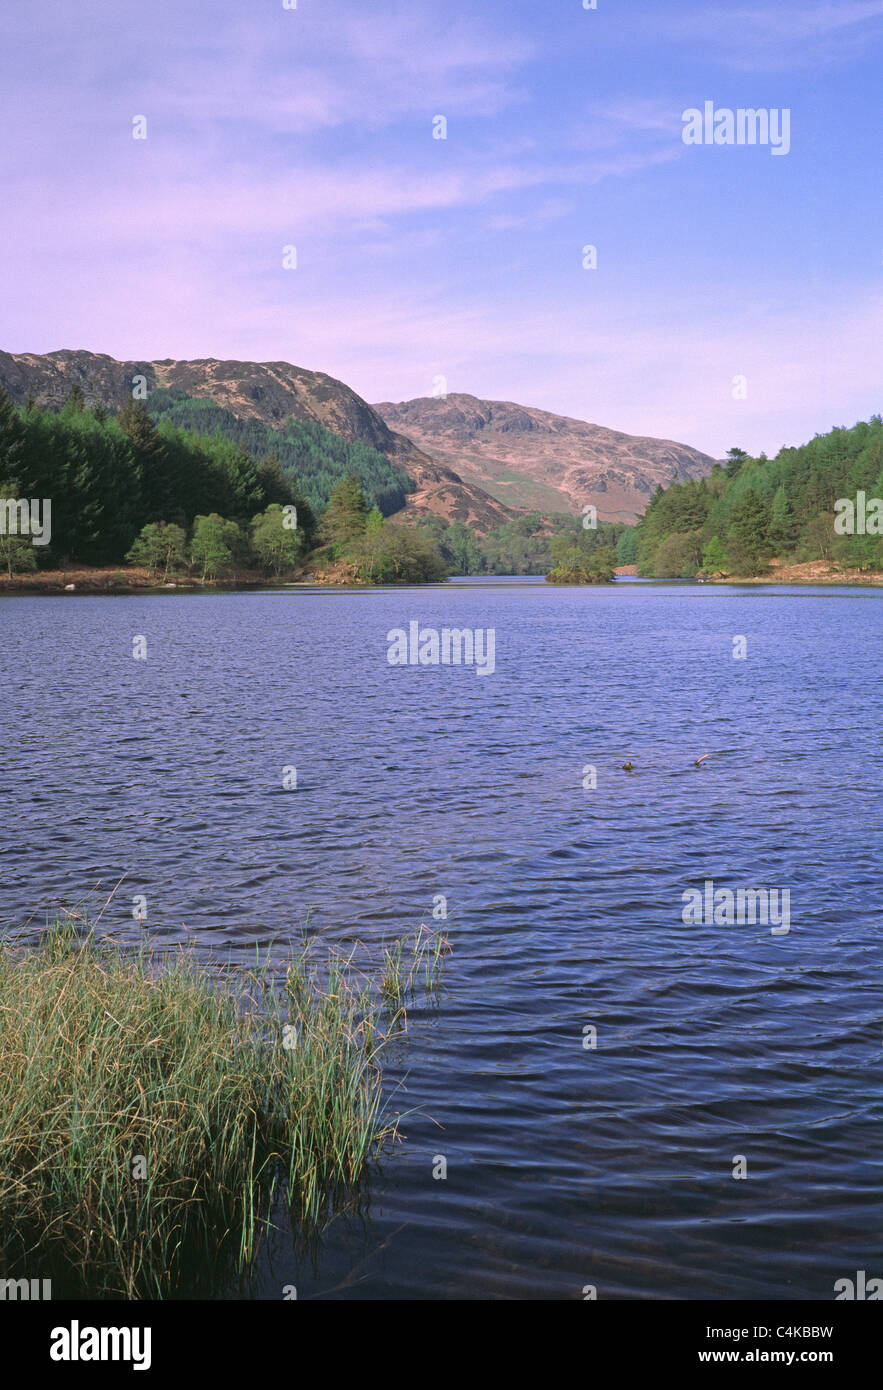 Loch Trool in GlenTrool, Galloway Forest Park, Dumfries and Galloway, Scotland, UK. Taken in Spring Stock Photo